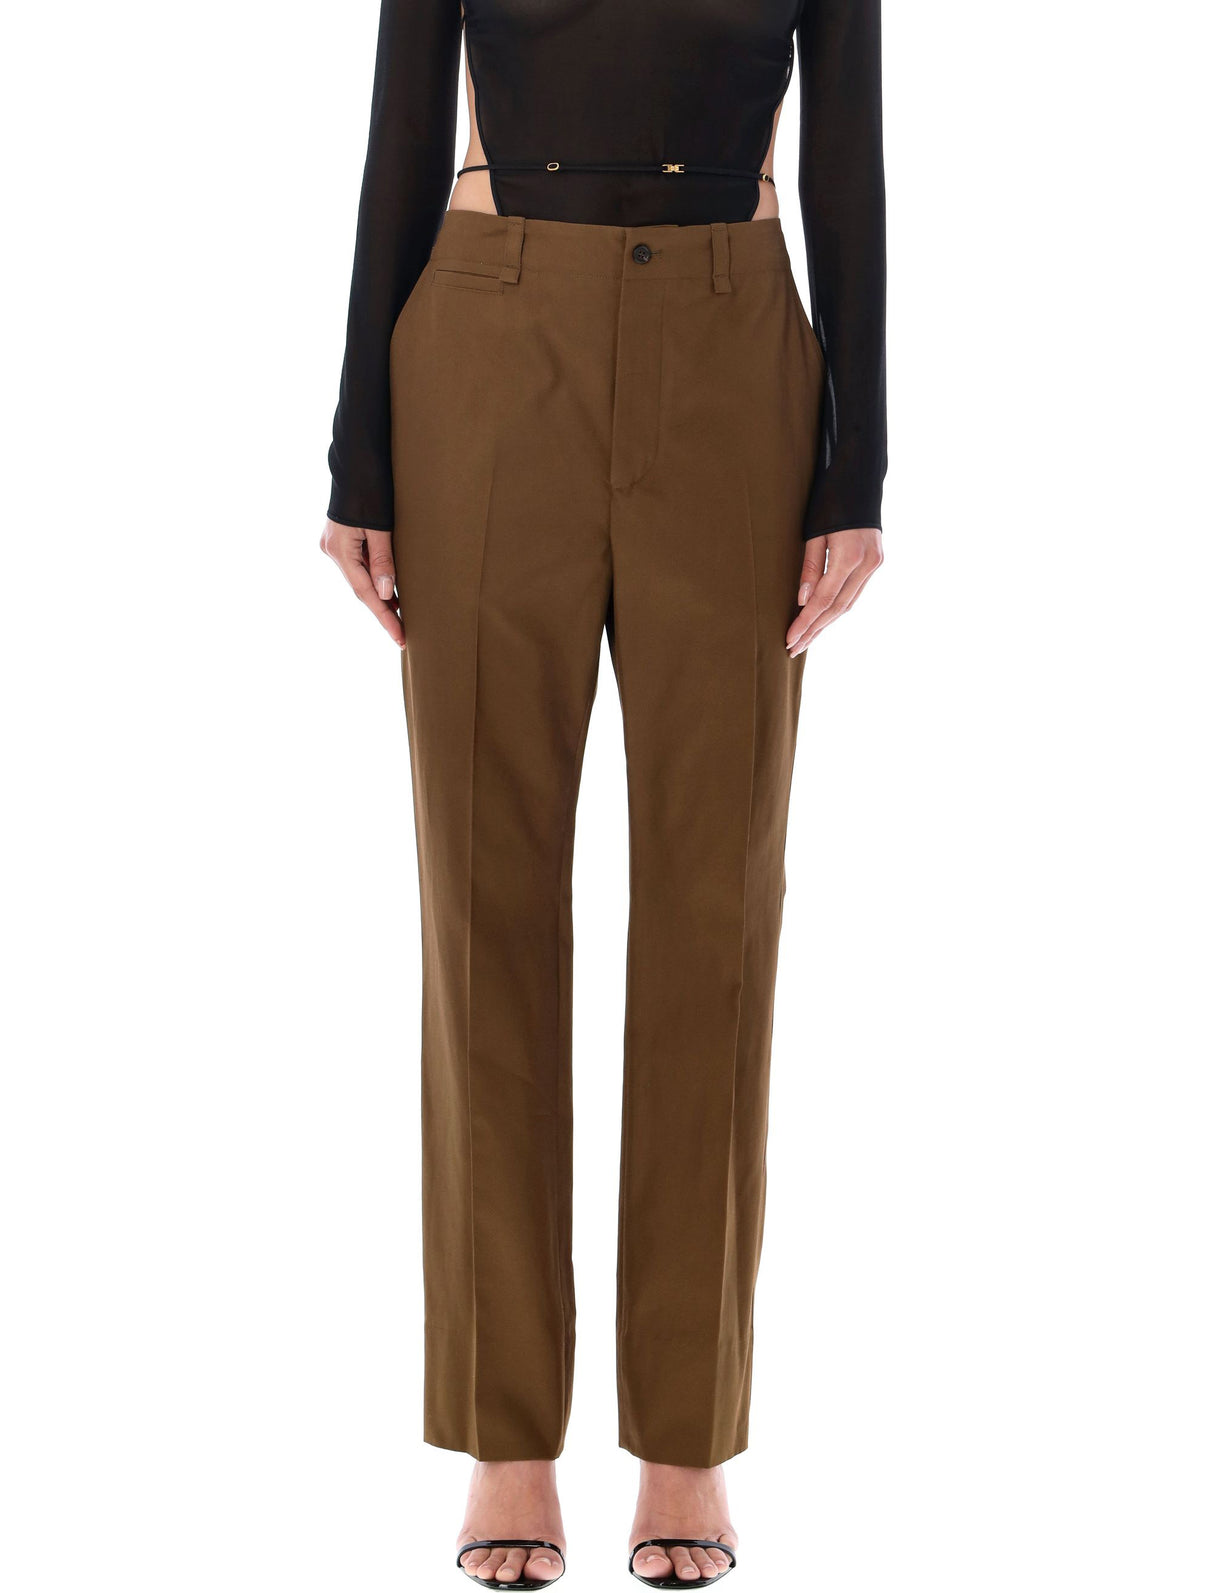 SAINT LAURENT Effortlessly Chic: Designer Trousers Perfect for Everyday Wear